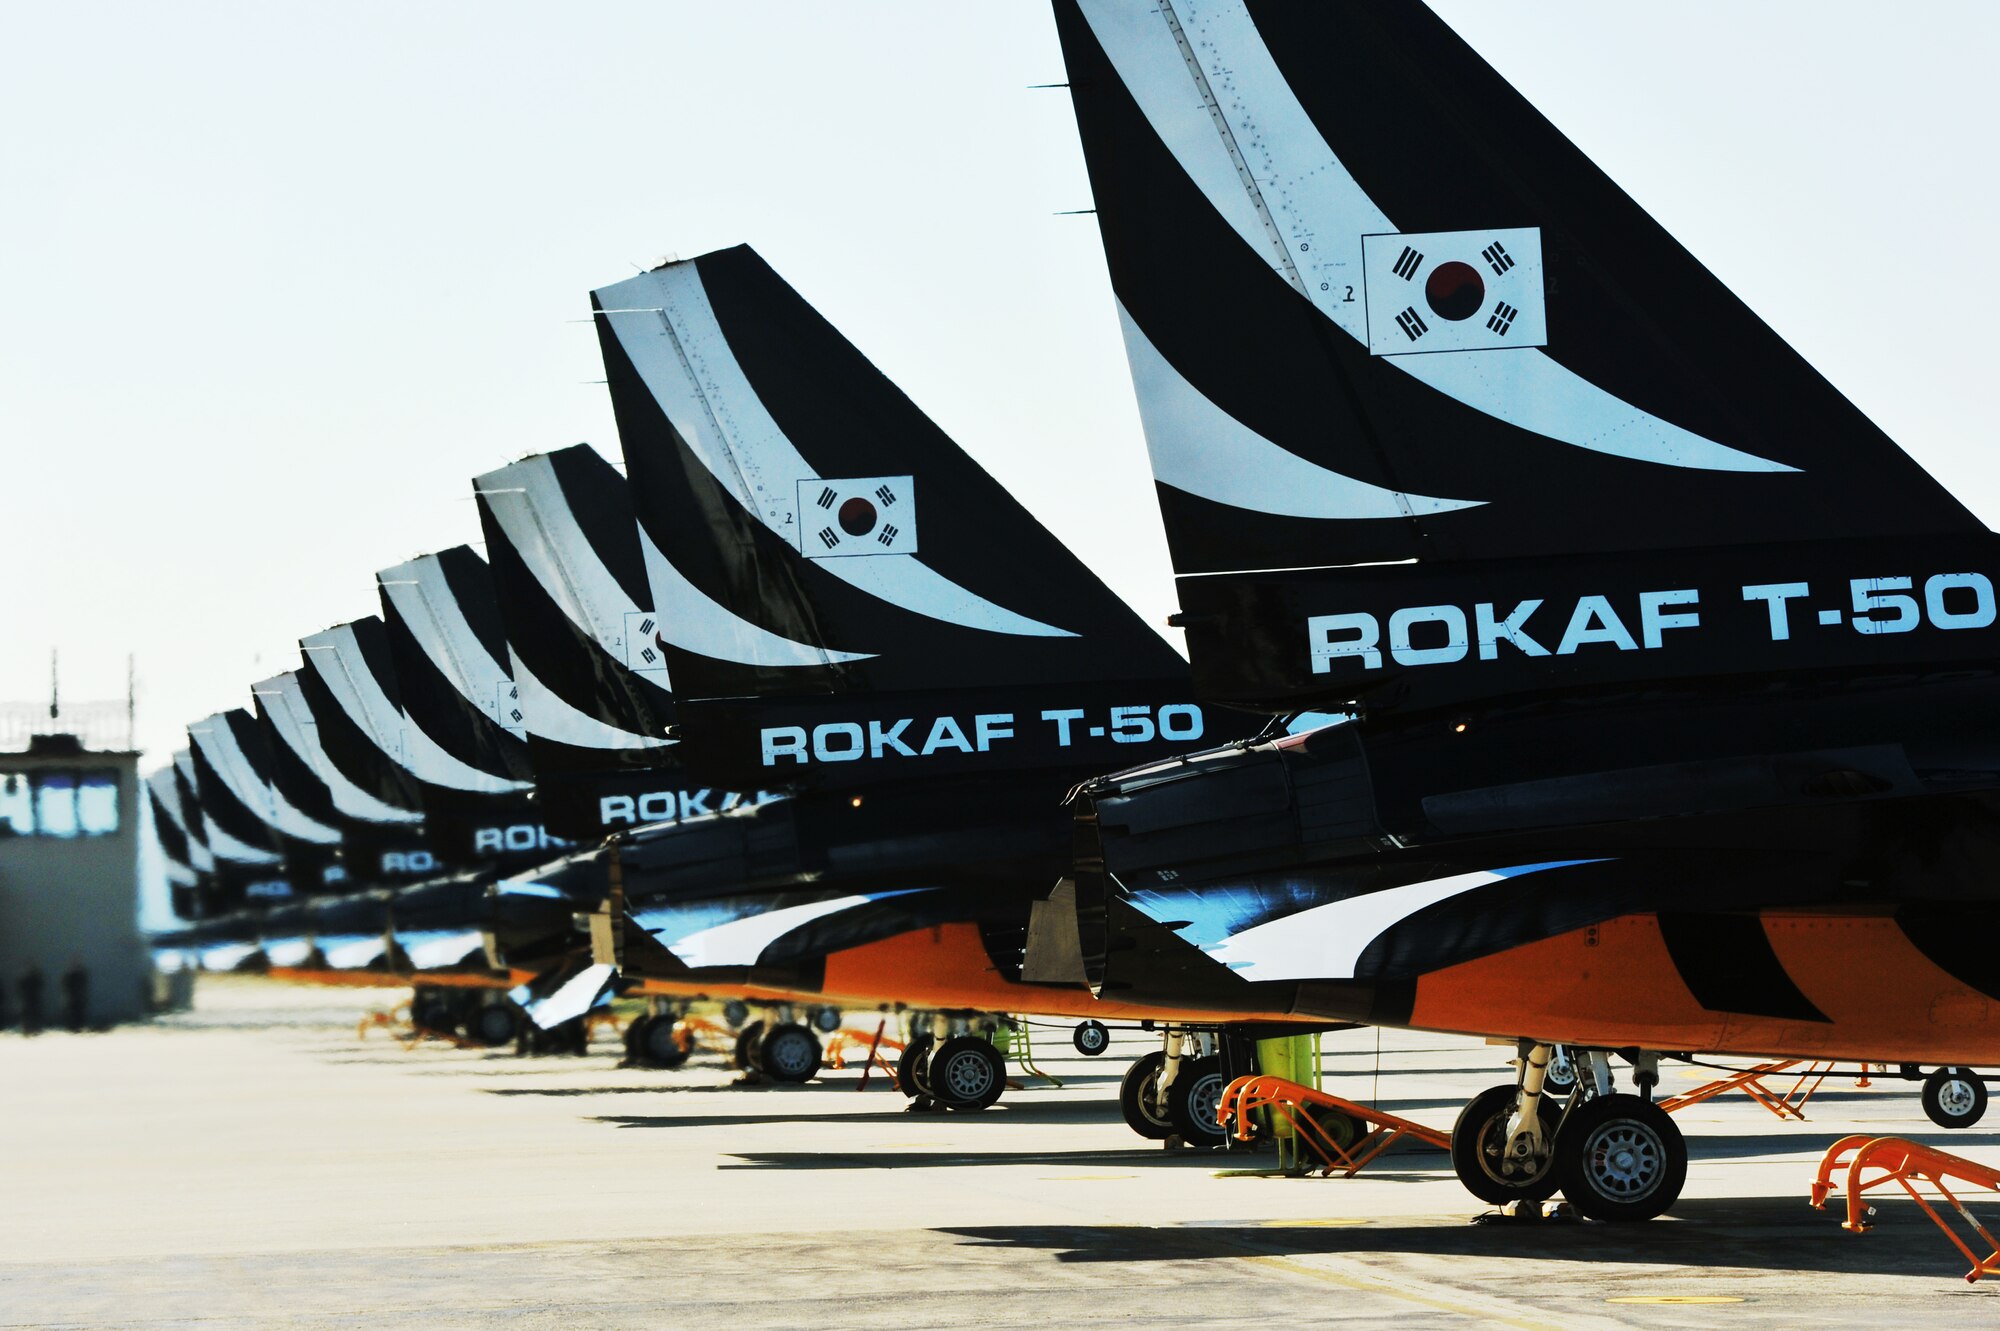 The Black Eagles prepare for takeoff on the Osan Air Base flight line Oct. 18, 2012. The team can perform up to 30 different types of acrobatics using T-50B training aircraft with supersonic capabilities. (U.S. Air Force photo/Staff Sgt. Stefanie Torres)